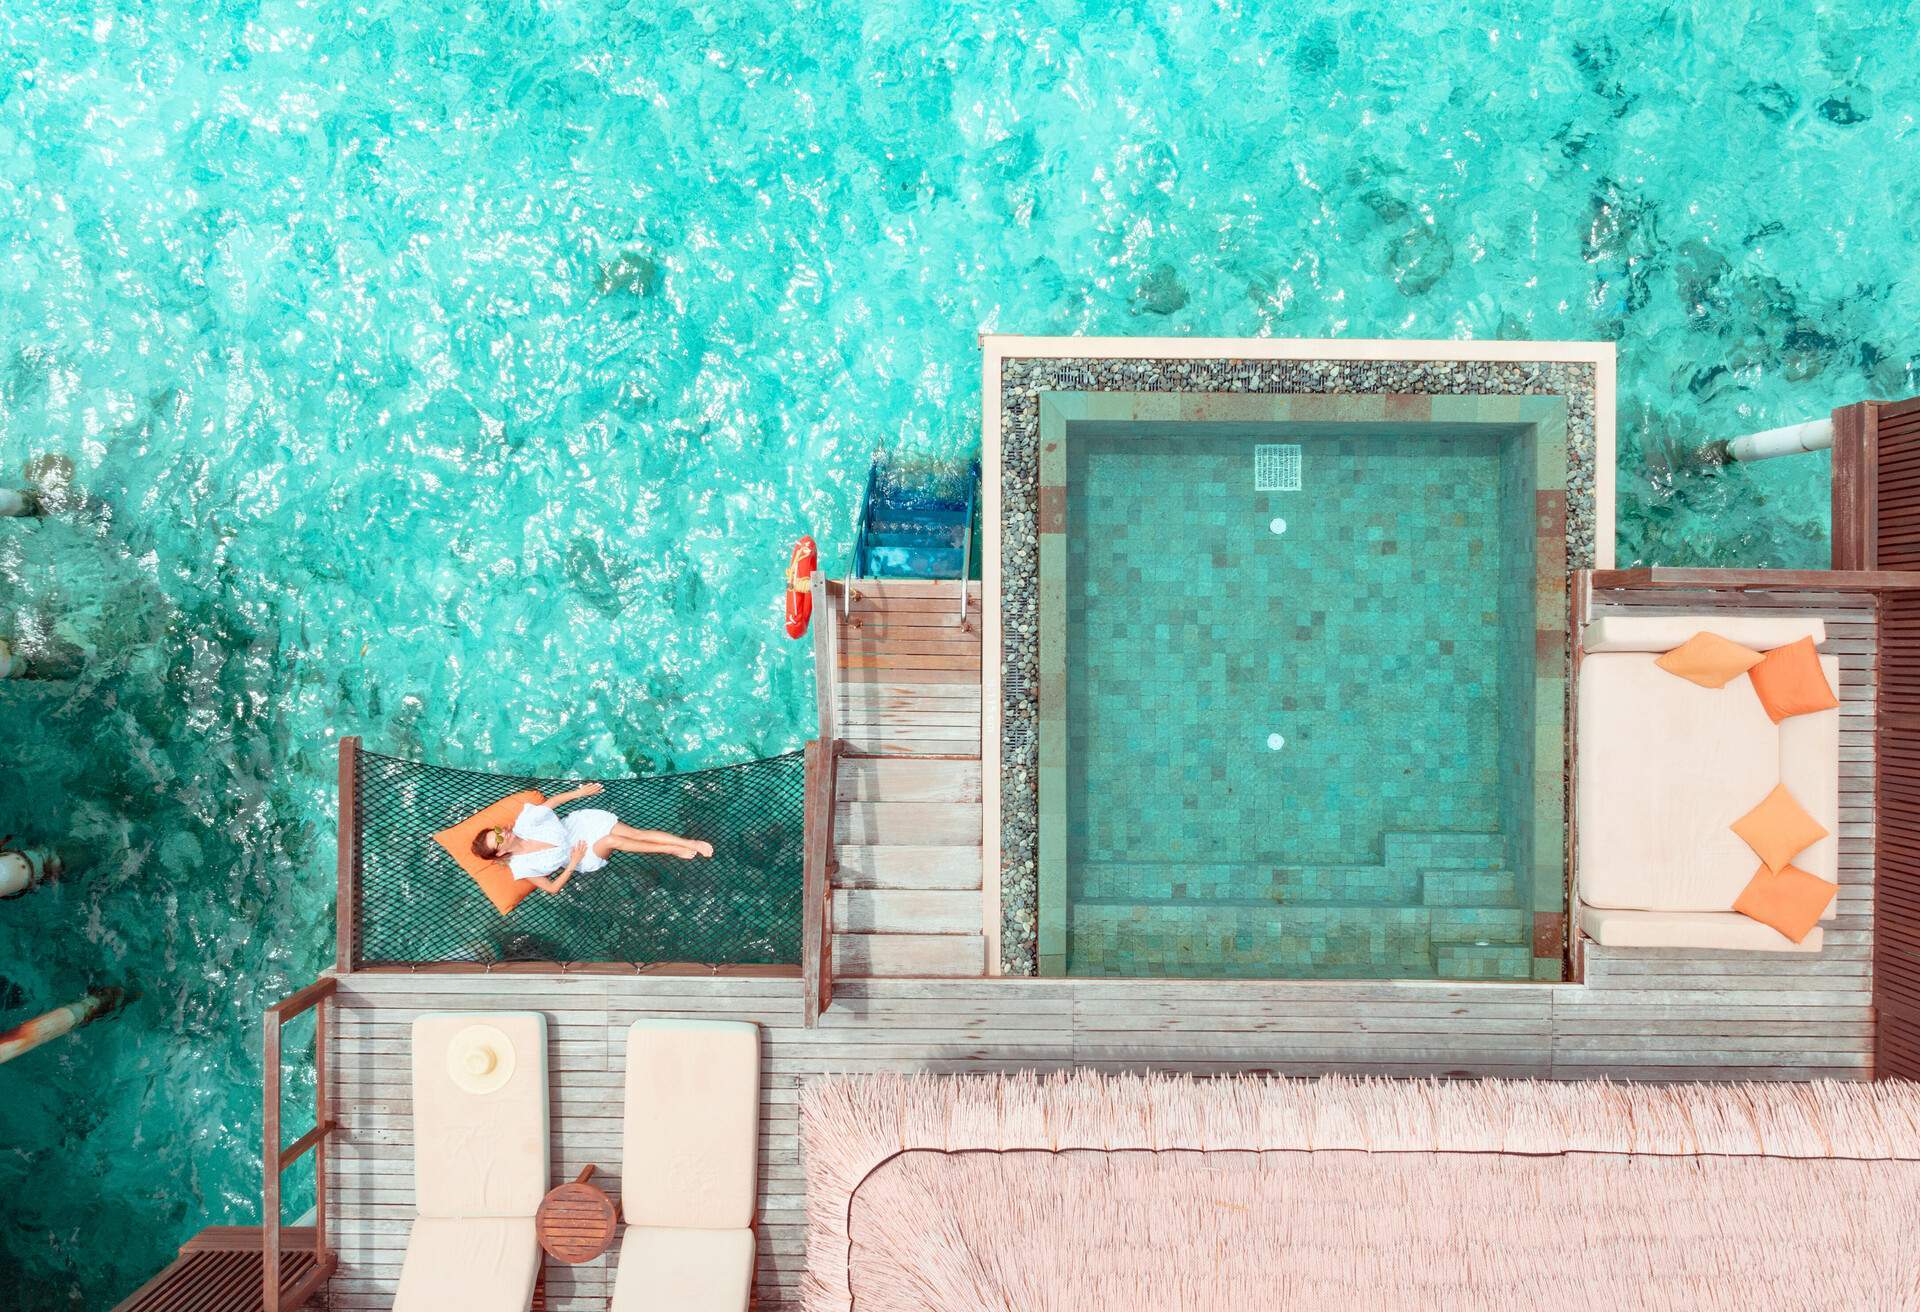 An overwater villa with a woman relaxing on a net bed beside a square pool with a couch and sunbeds.